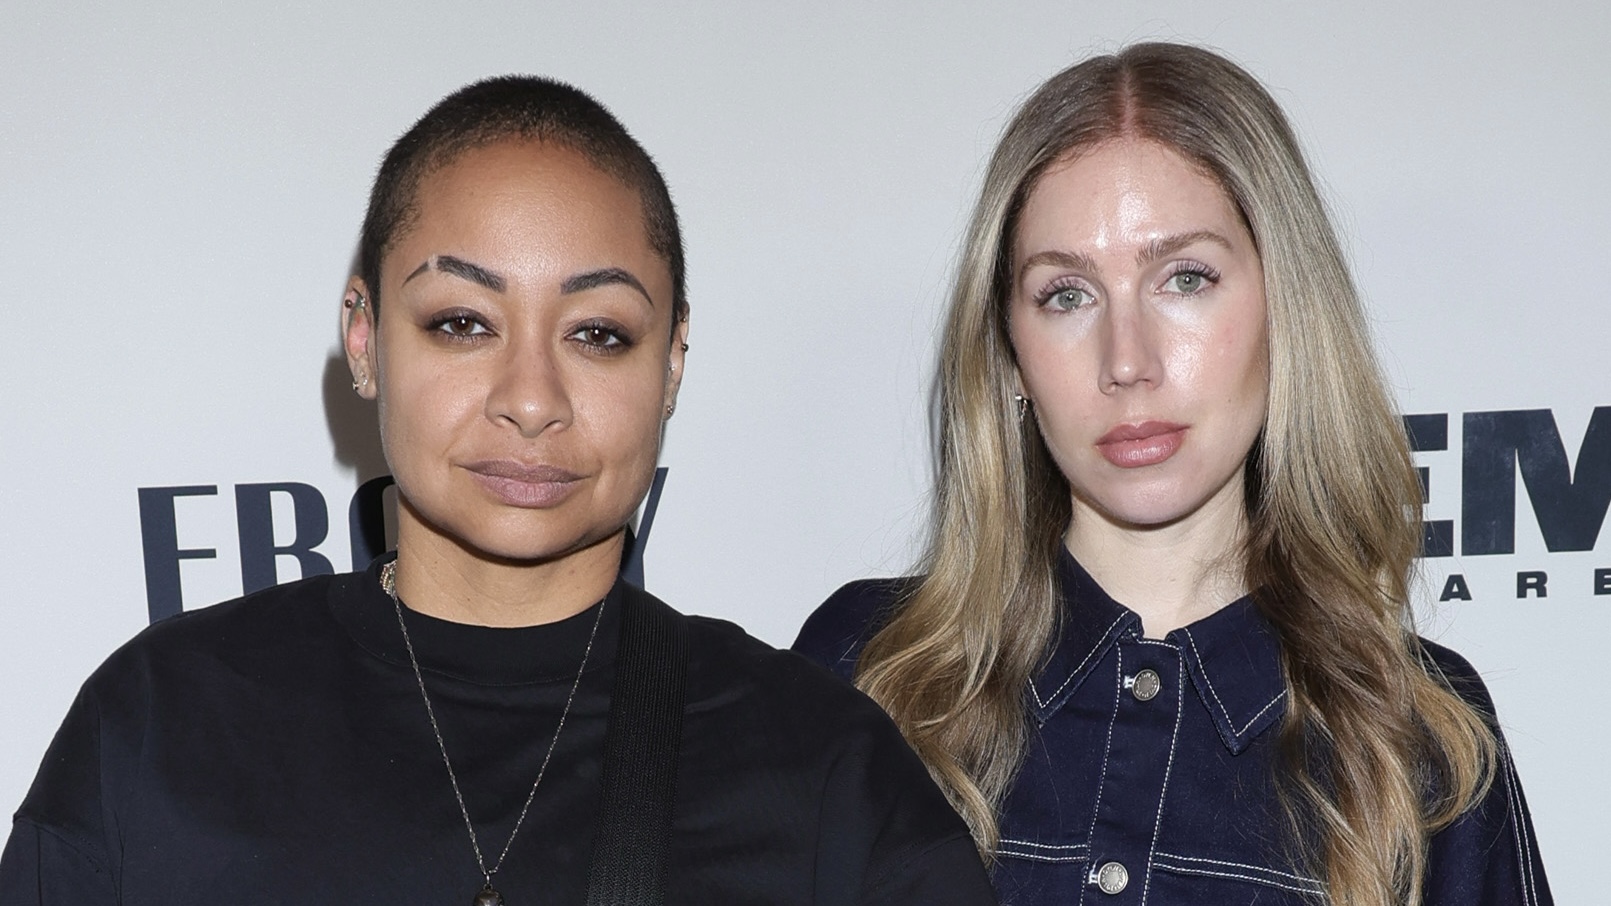 Raven Symone Speaks Out After Her Wife Miranda Allegedly Received Death Threats WATCH